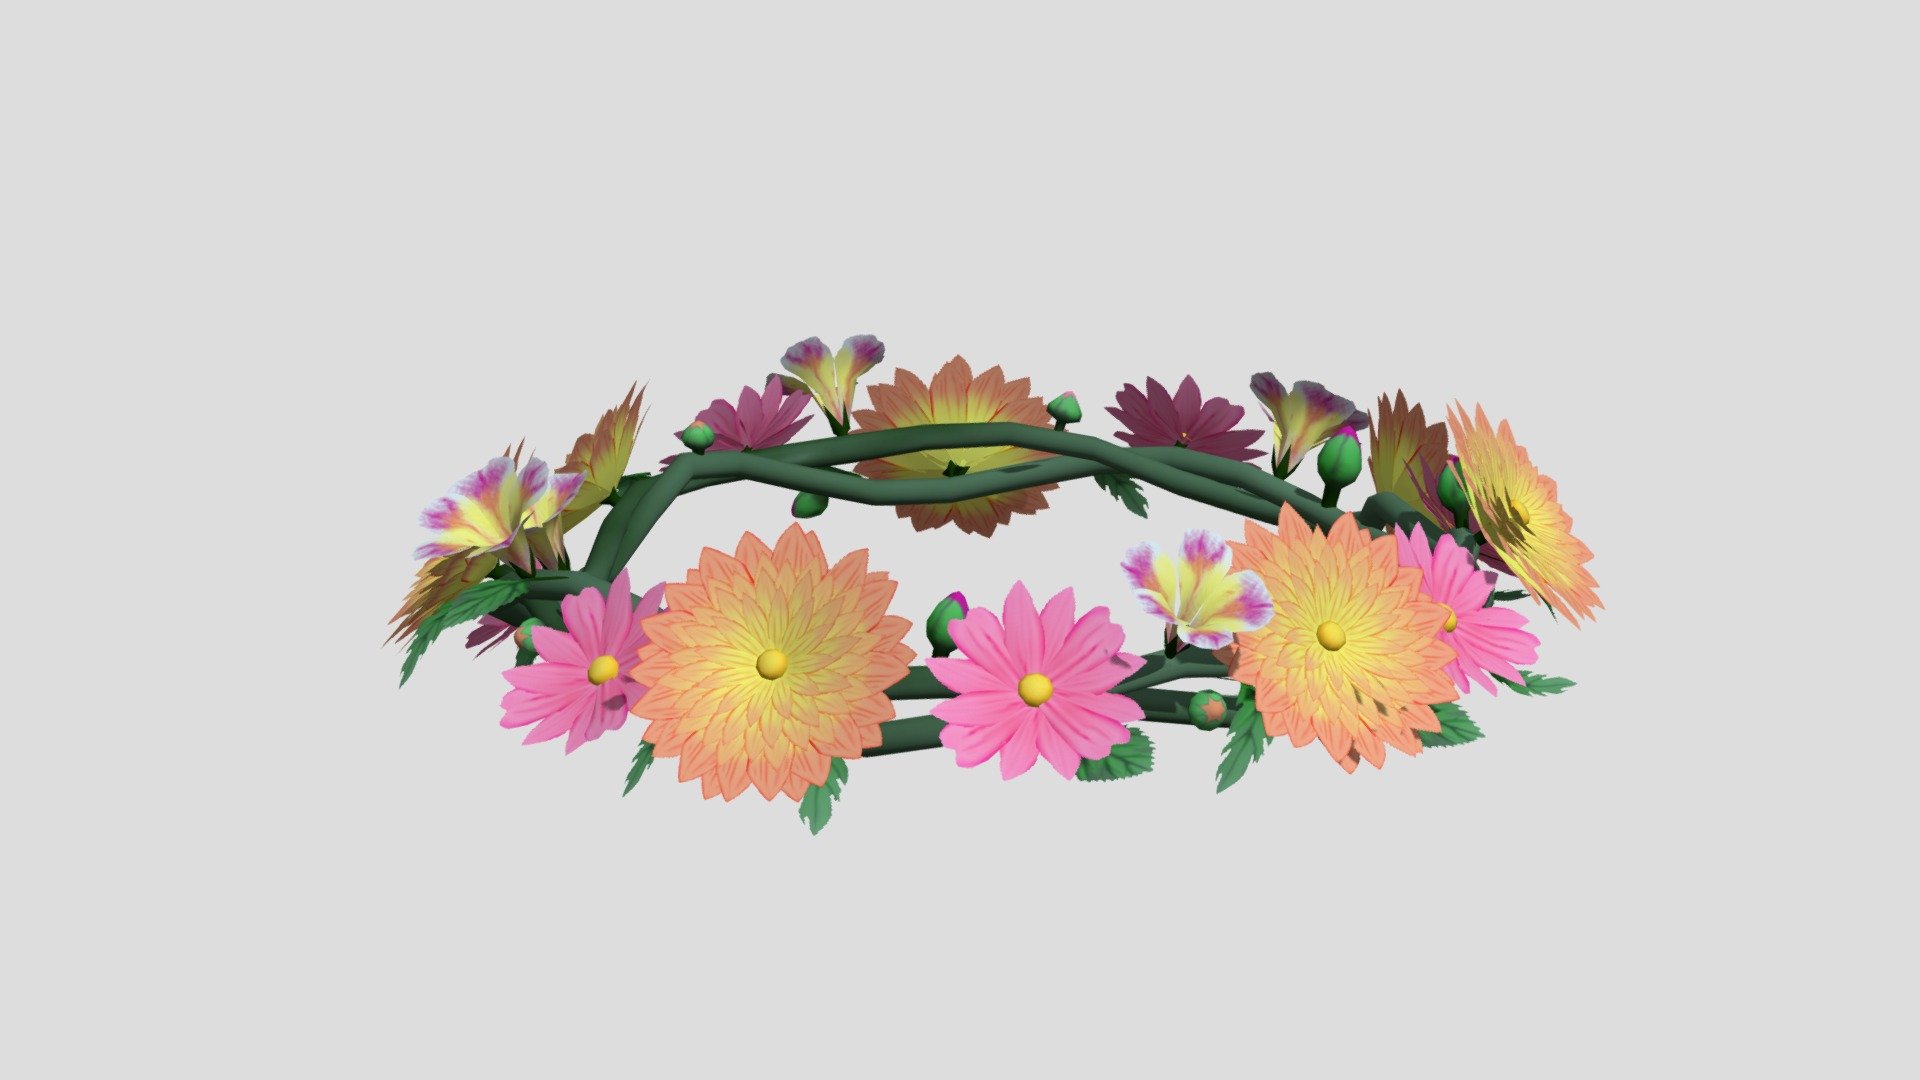 Flower crown made from scratch using maya, blender and textured using substance painter - Flower Crown - 3D model by Spectral_Burrow 3d model